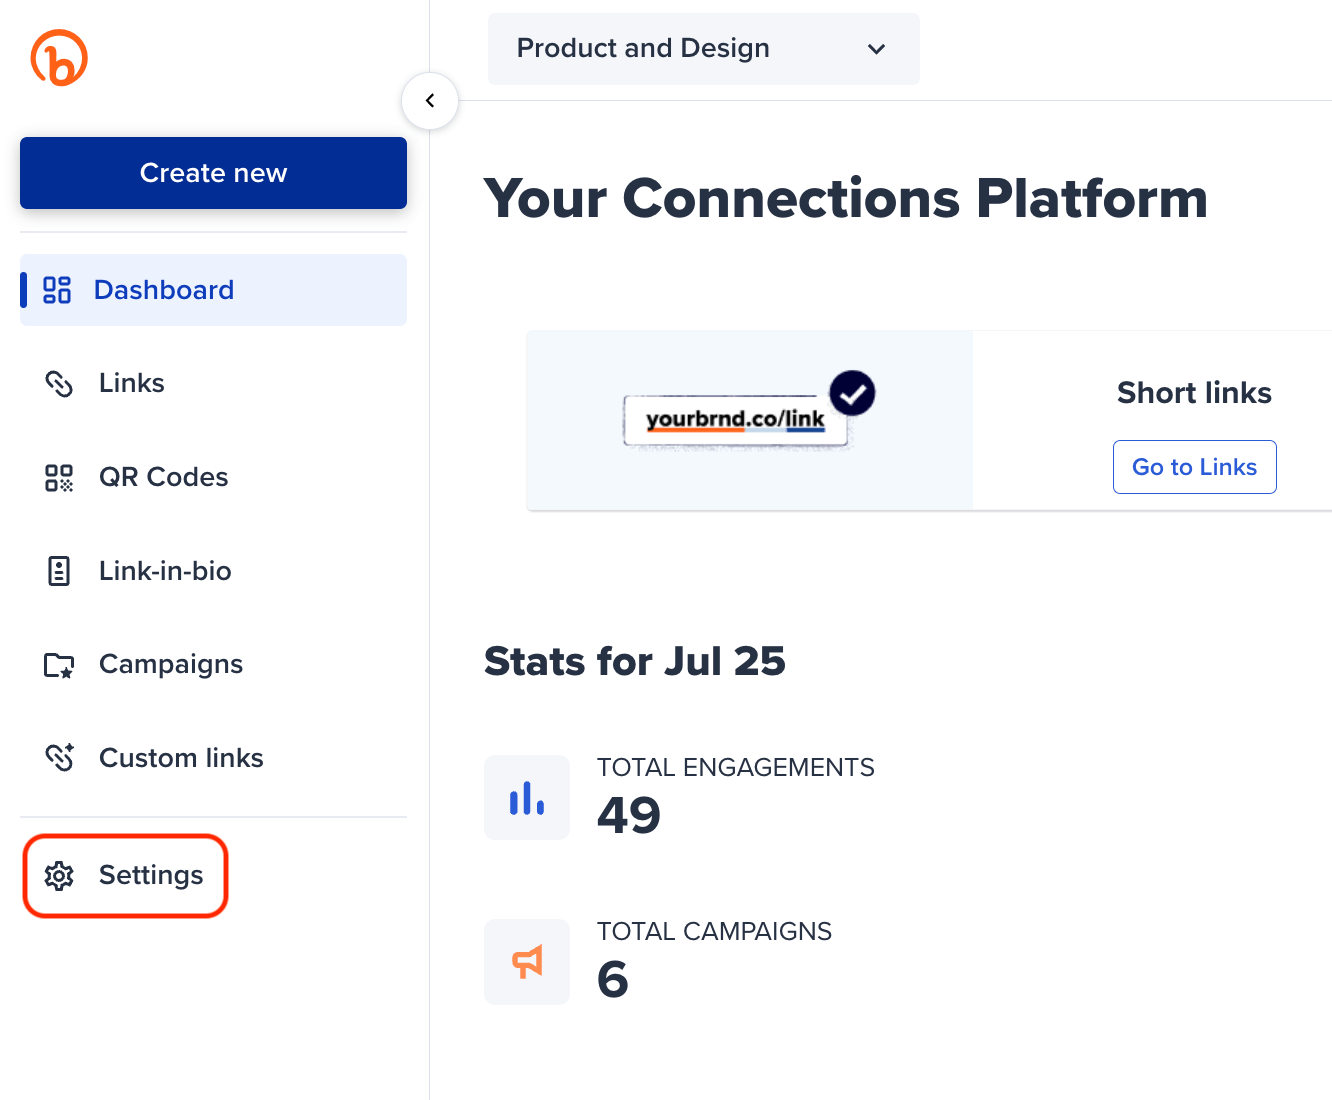 Your connections platform and settings circled